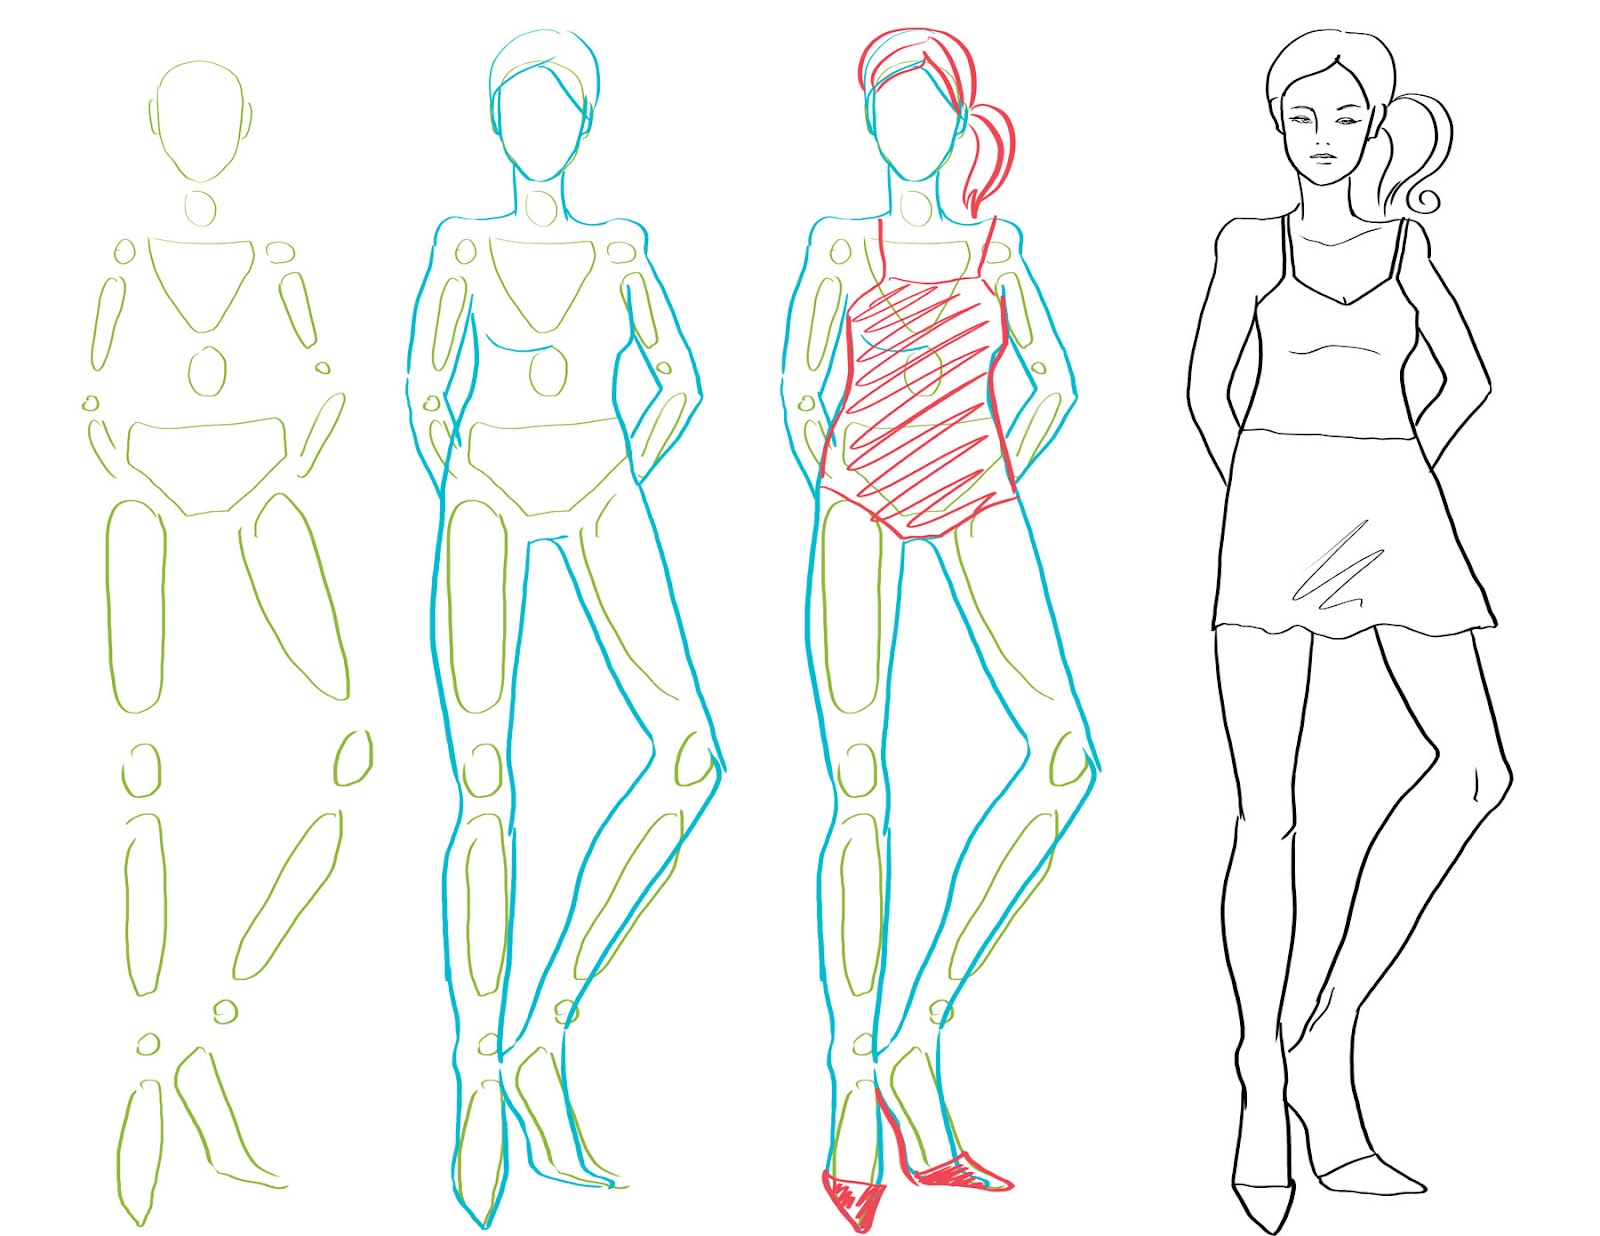 Fashion Model Figure Drawing at GetDrawings.com | Free for personal ...